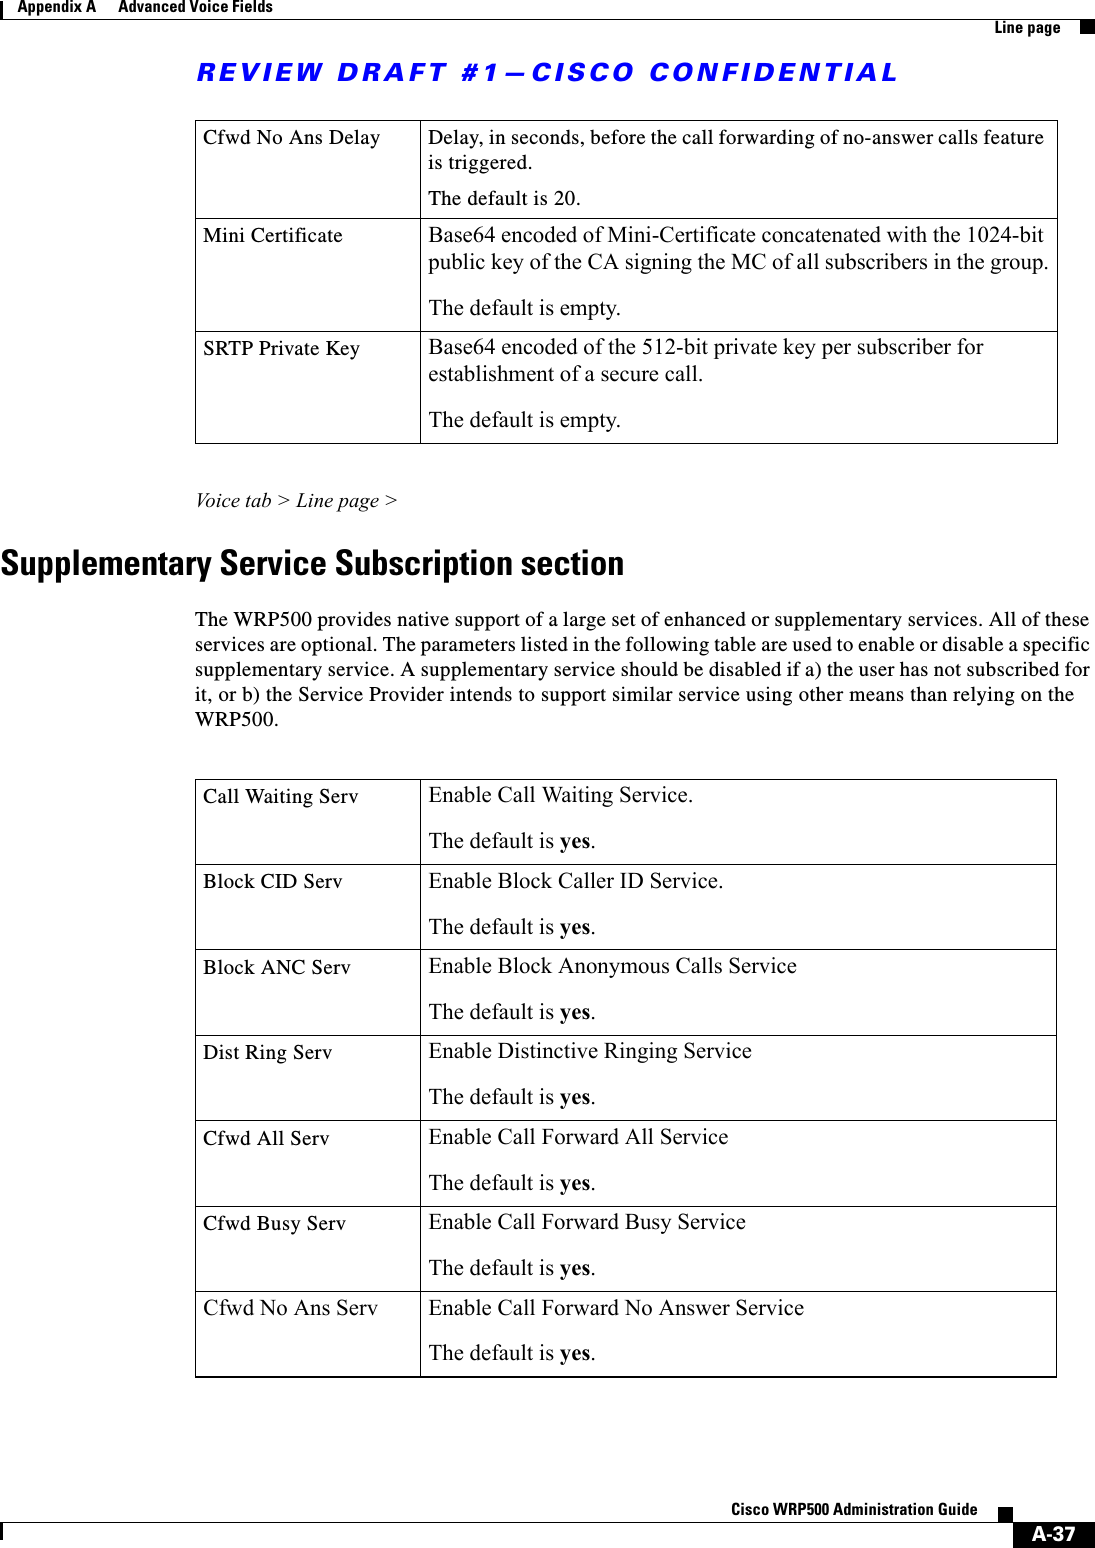 REVIEW DRAFT #1—CISCO CONFIDENTIALA-37Cisco WRP500 Administration Guide Appendix A      Advanced Voice Fields  Line pageVoice tab &gt; Line page &gt;Supplementary Service Subscription sectionThe WRP500 provides native support of a large set of enhanced or supplementary services. All of these services are optional. The parameters listed in the following table are used to enable or disable a specific supplementary service. A supplementary service should be disabled if a) the user has not subscribed for it, or b) the Service Provider intends to support similar service using other means than relying on the WRP500.Cfwd No Ans Delay  Delay, in seconds, before the call forwarding of no-answer calls feature is triggered.The default is 20. Mini Certificate Base64 encoded of Mini-Certificate concatenated with the 1024-bit public key of the CA signing the MC of all subscribers in the group.The default is empty.SRTP Private Key Base64 encoded of the 512-bit private key per subscriber for establishment of a secure call.The default is empty.Call Waiting Serv Enable Call Waiting Service.The default is yes. Block CID Serv Enable Block Caller ID Service.The default is yes. Block ANC Serv Enable Block Anonymous Calls ServiceThe default is yes.Dist Ring Serv Enable Distinctive Ringing ServiceThe default is yes.Cfwd All Serv Enable Call Forward All ServiceThe default is yes.Cfwd Busy Serv Enable Call Forward Busy ServiceThe default is yes.Cfwd No Ans Serv Enable Call Forward No Answer ServiceThe default is yes.